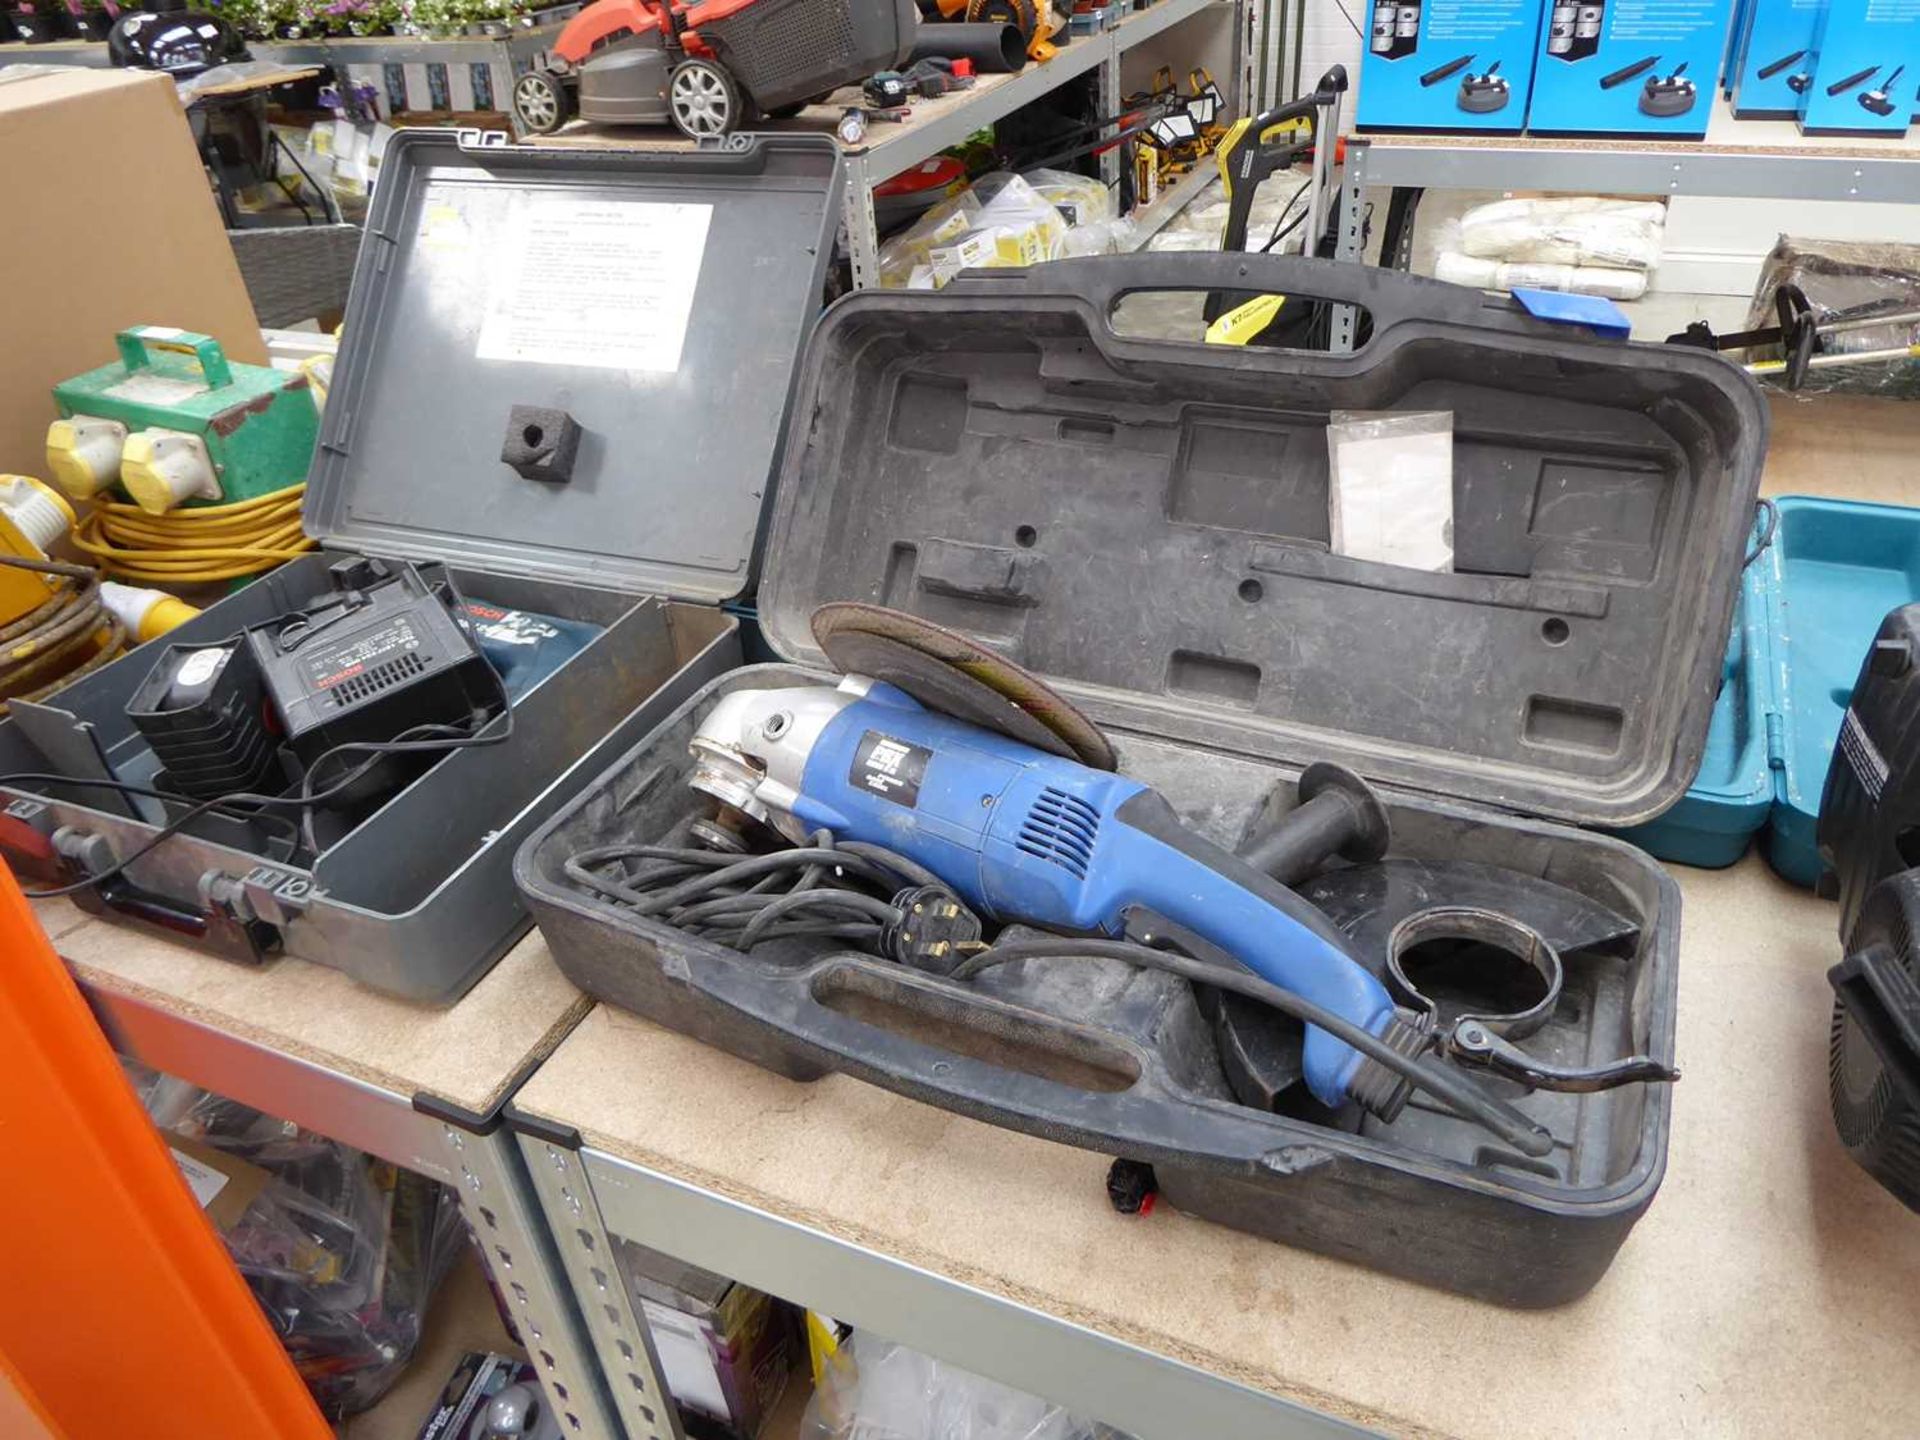 Cased Bosch electric drill, together with a cased 240v angle grinder